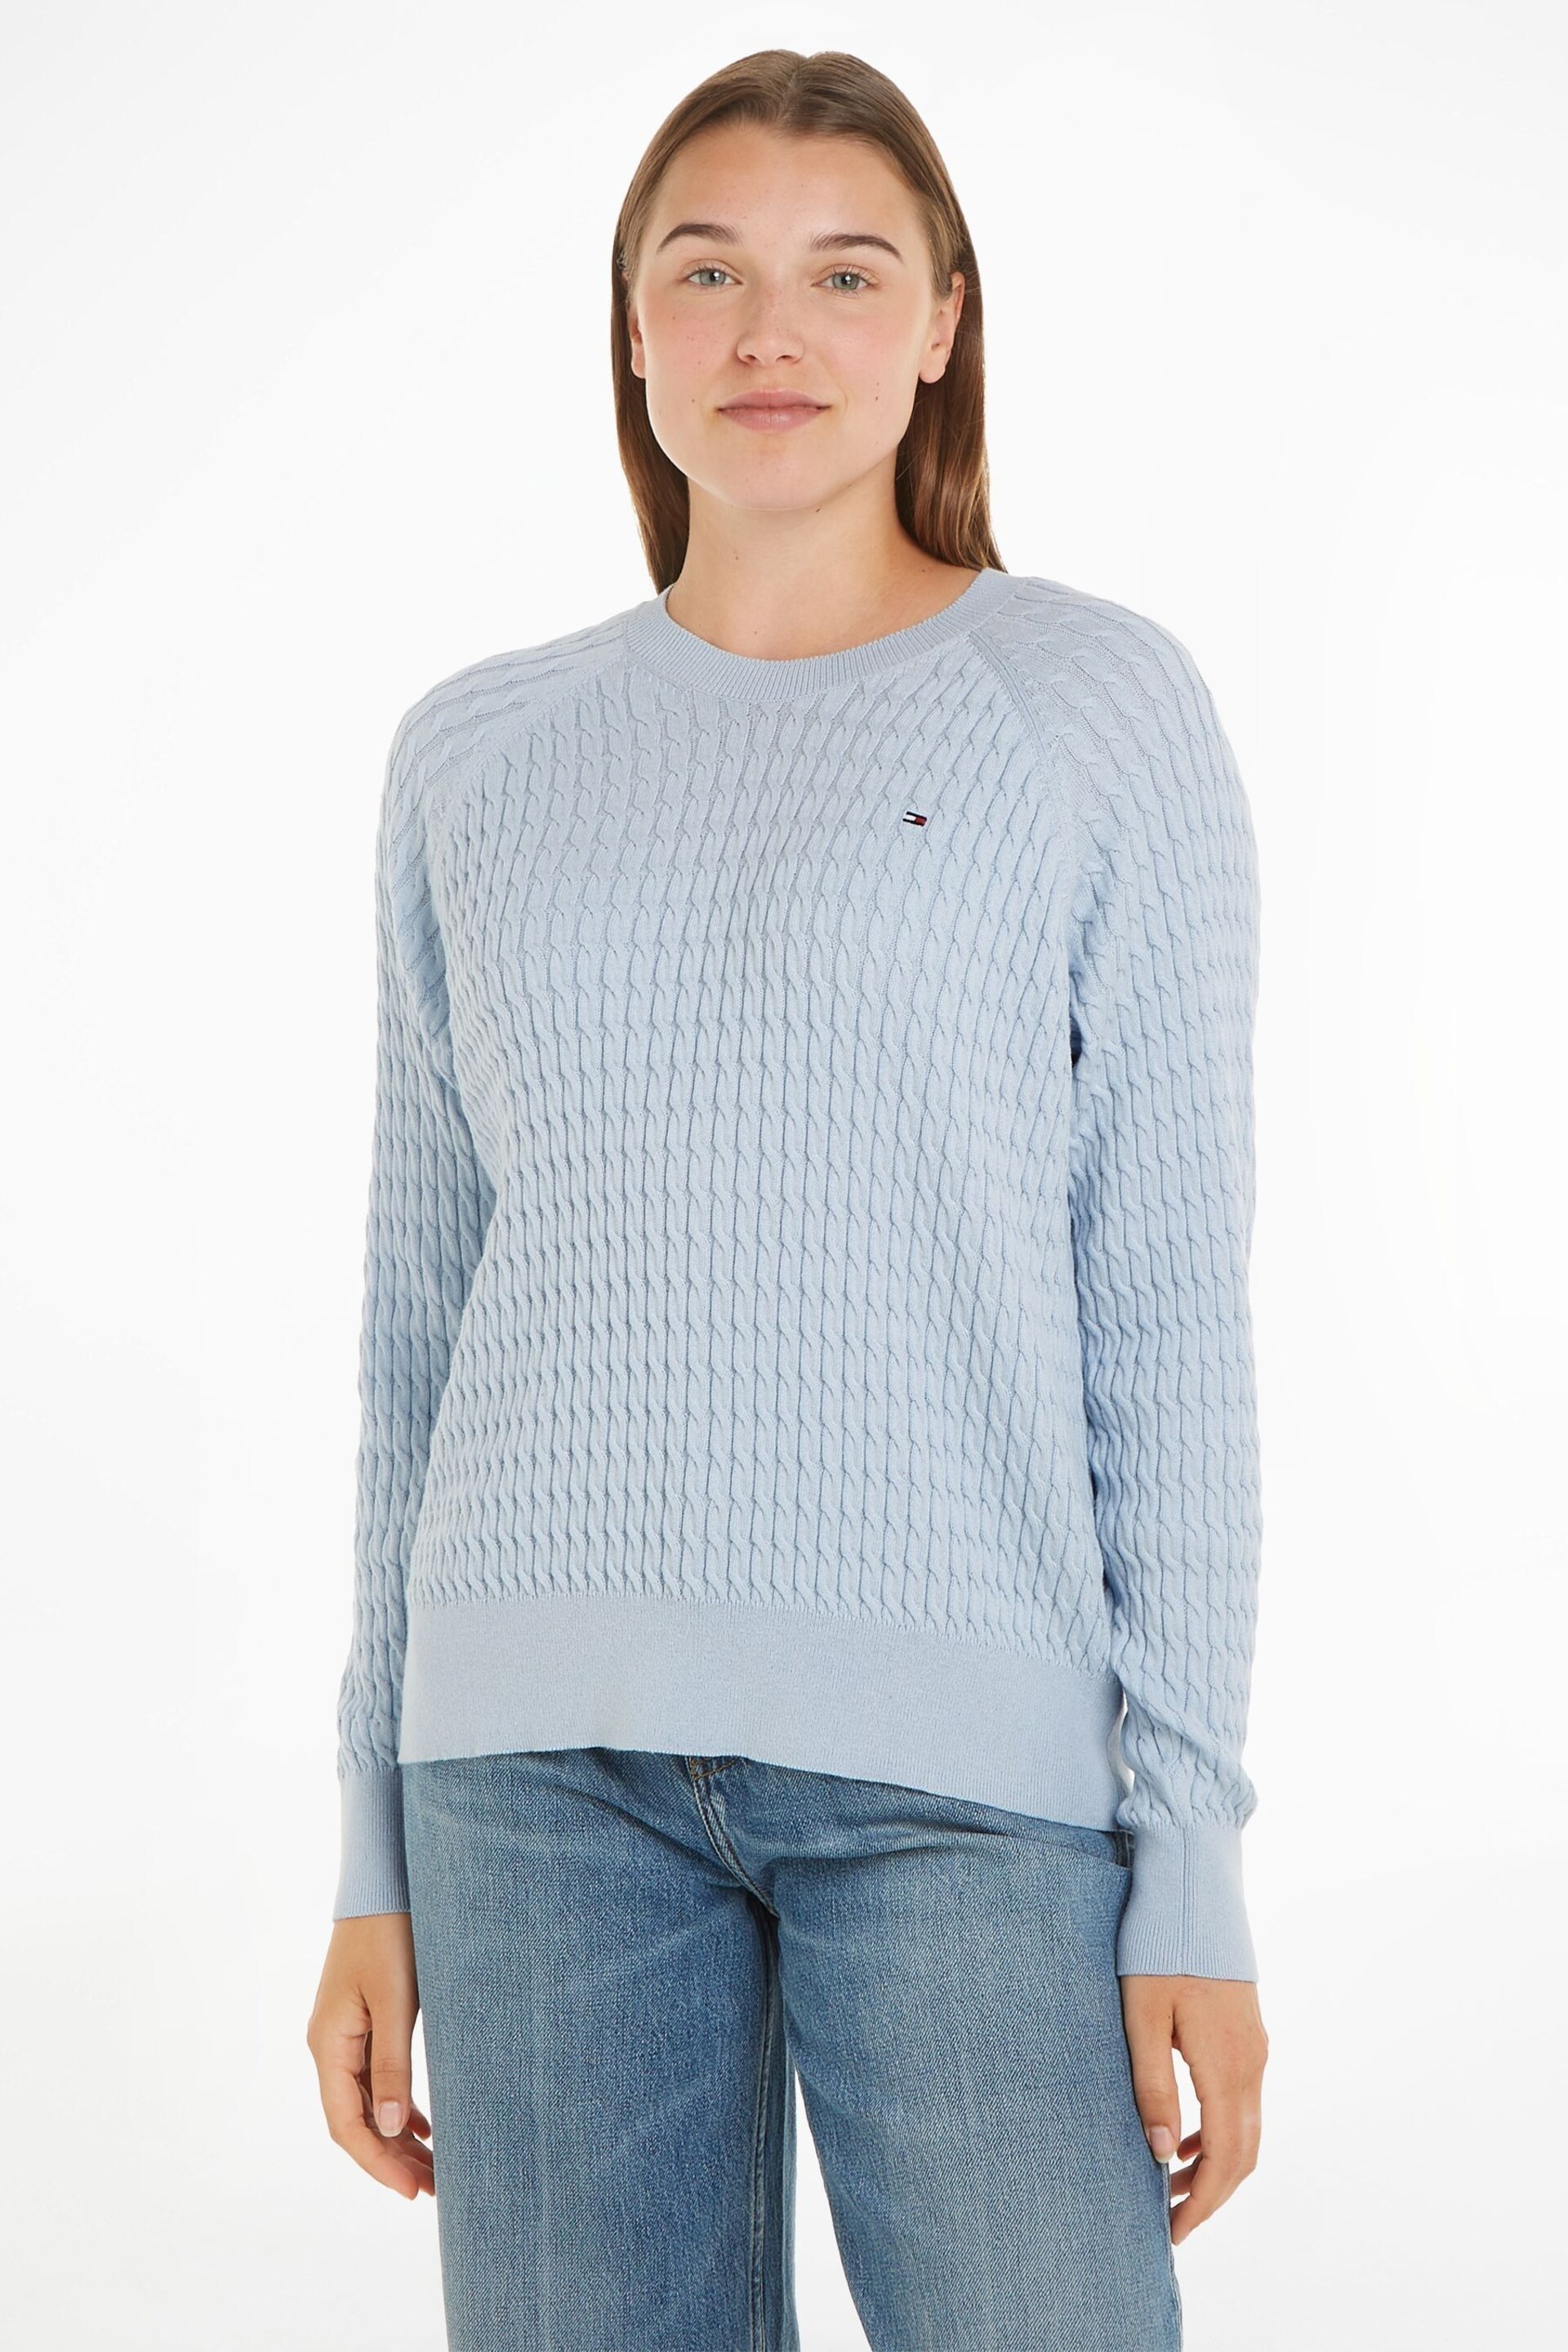 Tommy Hilfiger Blue Cable Knit Sweater - Image 1 of 6